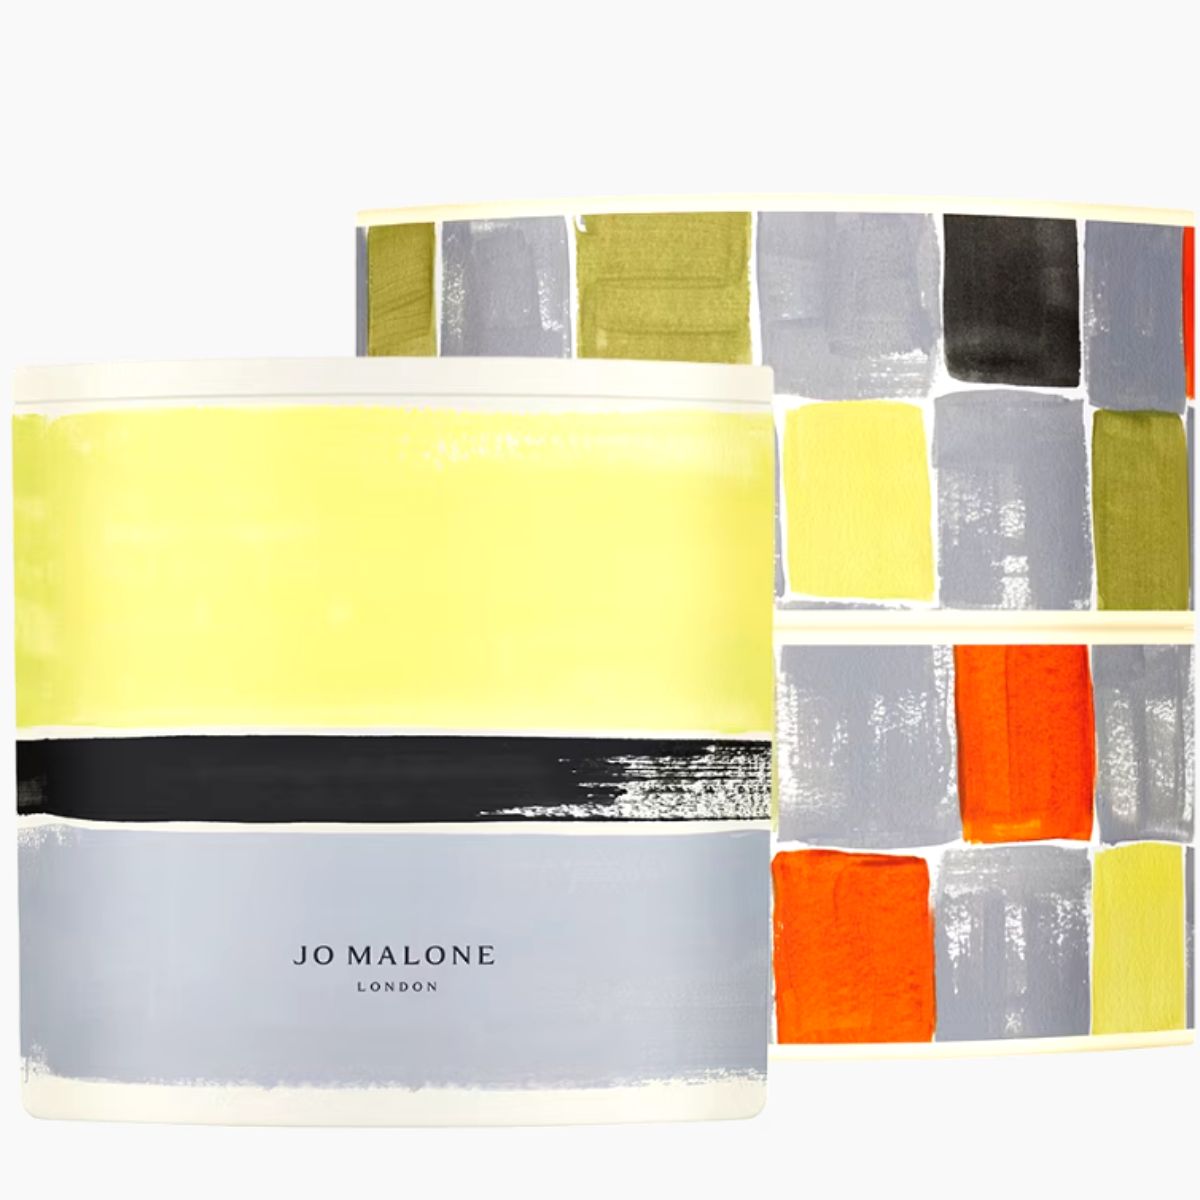 Design Edition Layered Candle Fresh and Fruity by Jo Malone